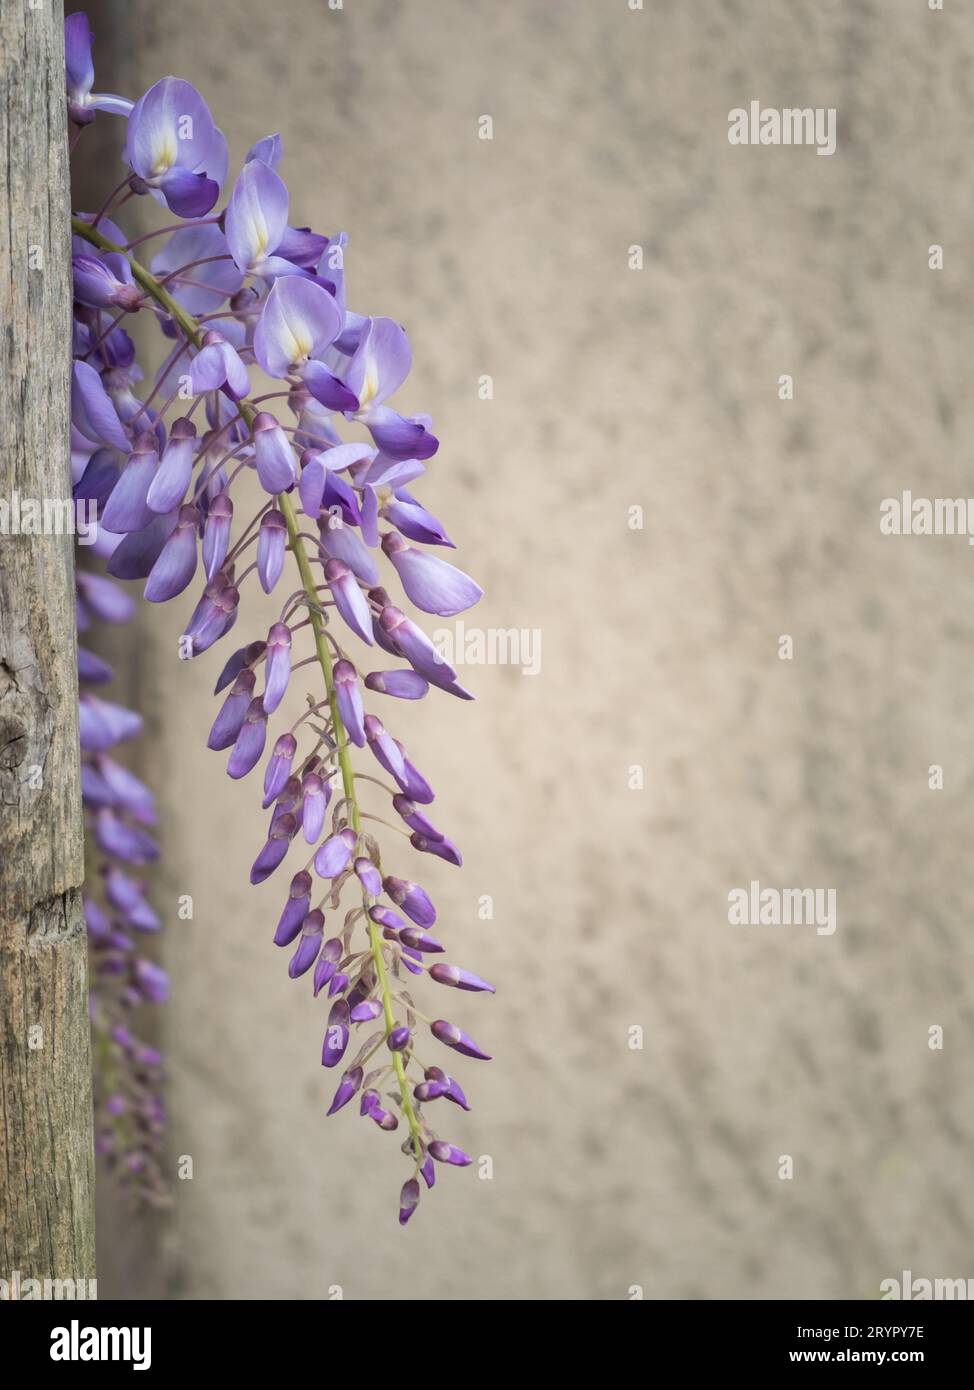 Purple wisteria photographed against a beige background Stock Photo